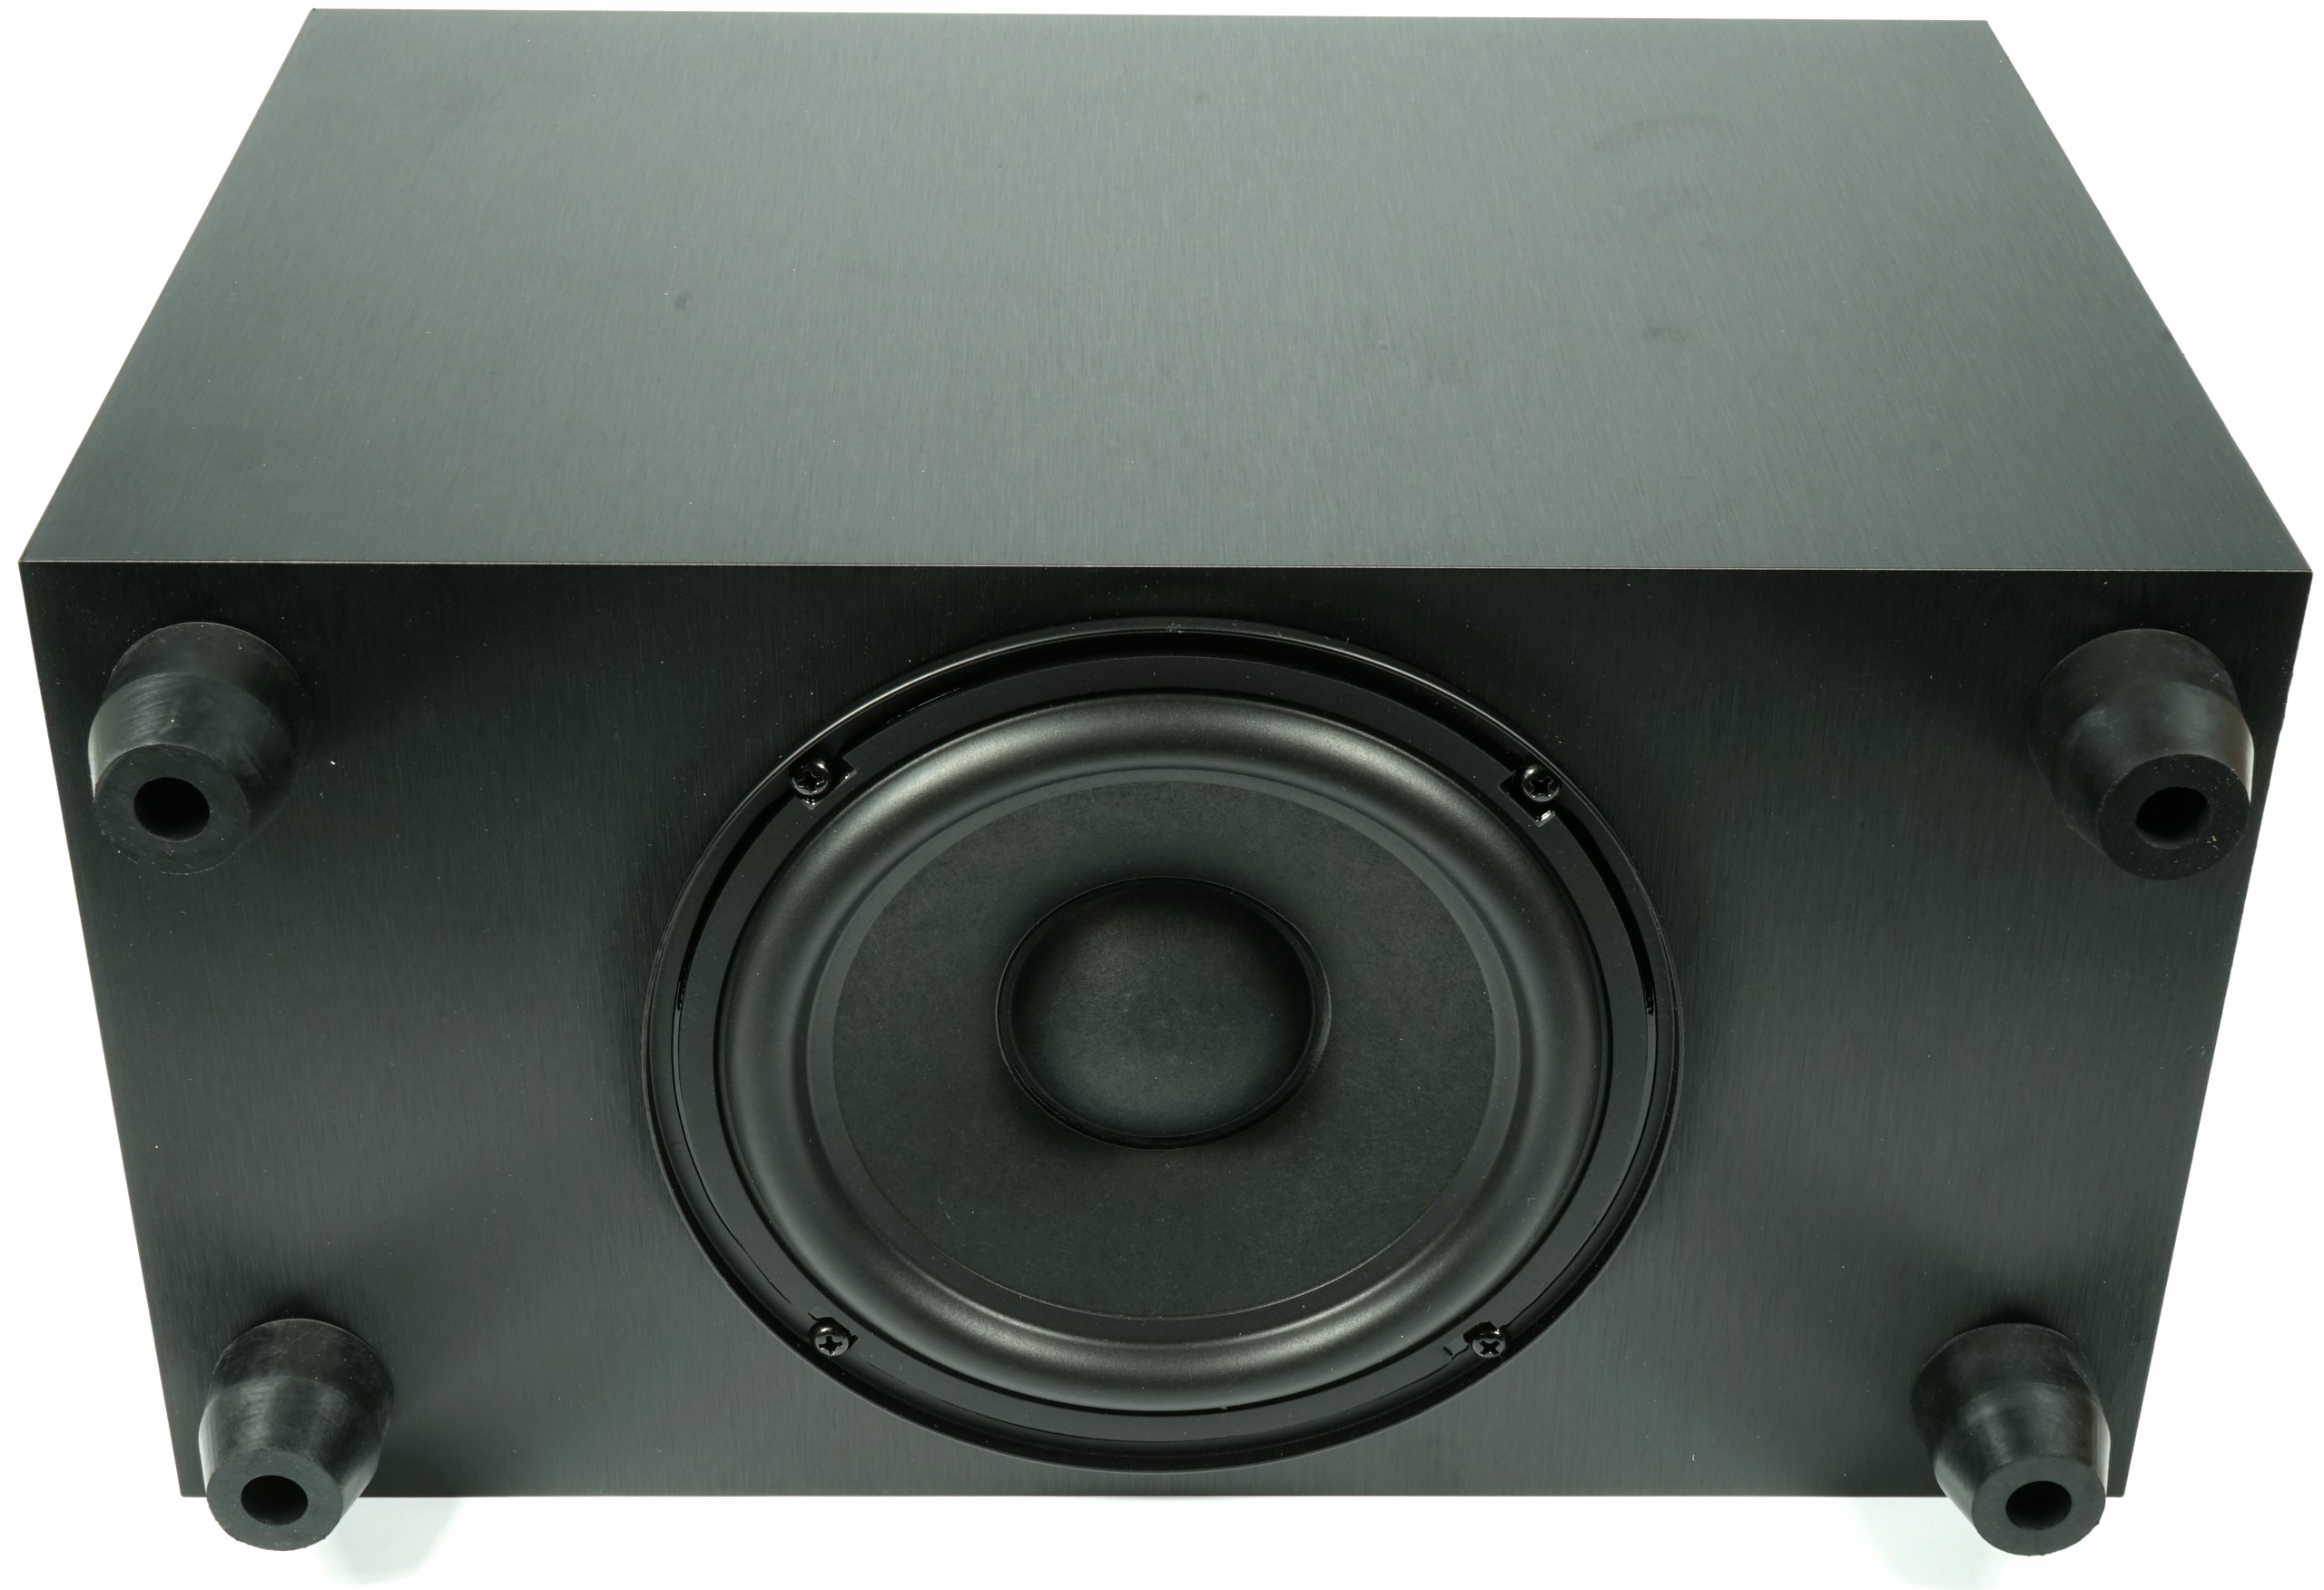 Subwoofer with down-fire principle